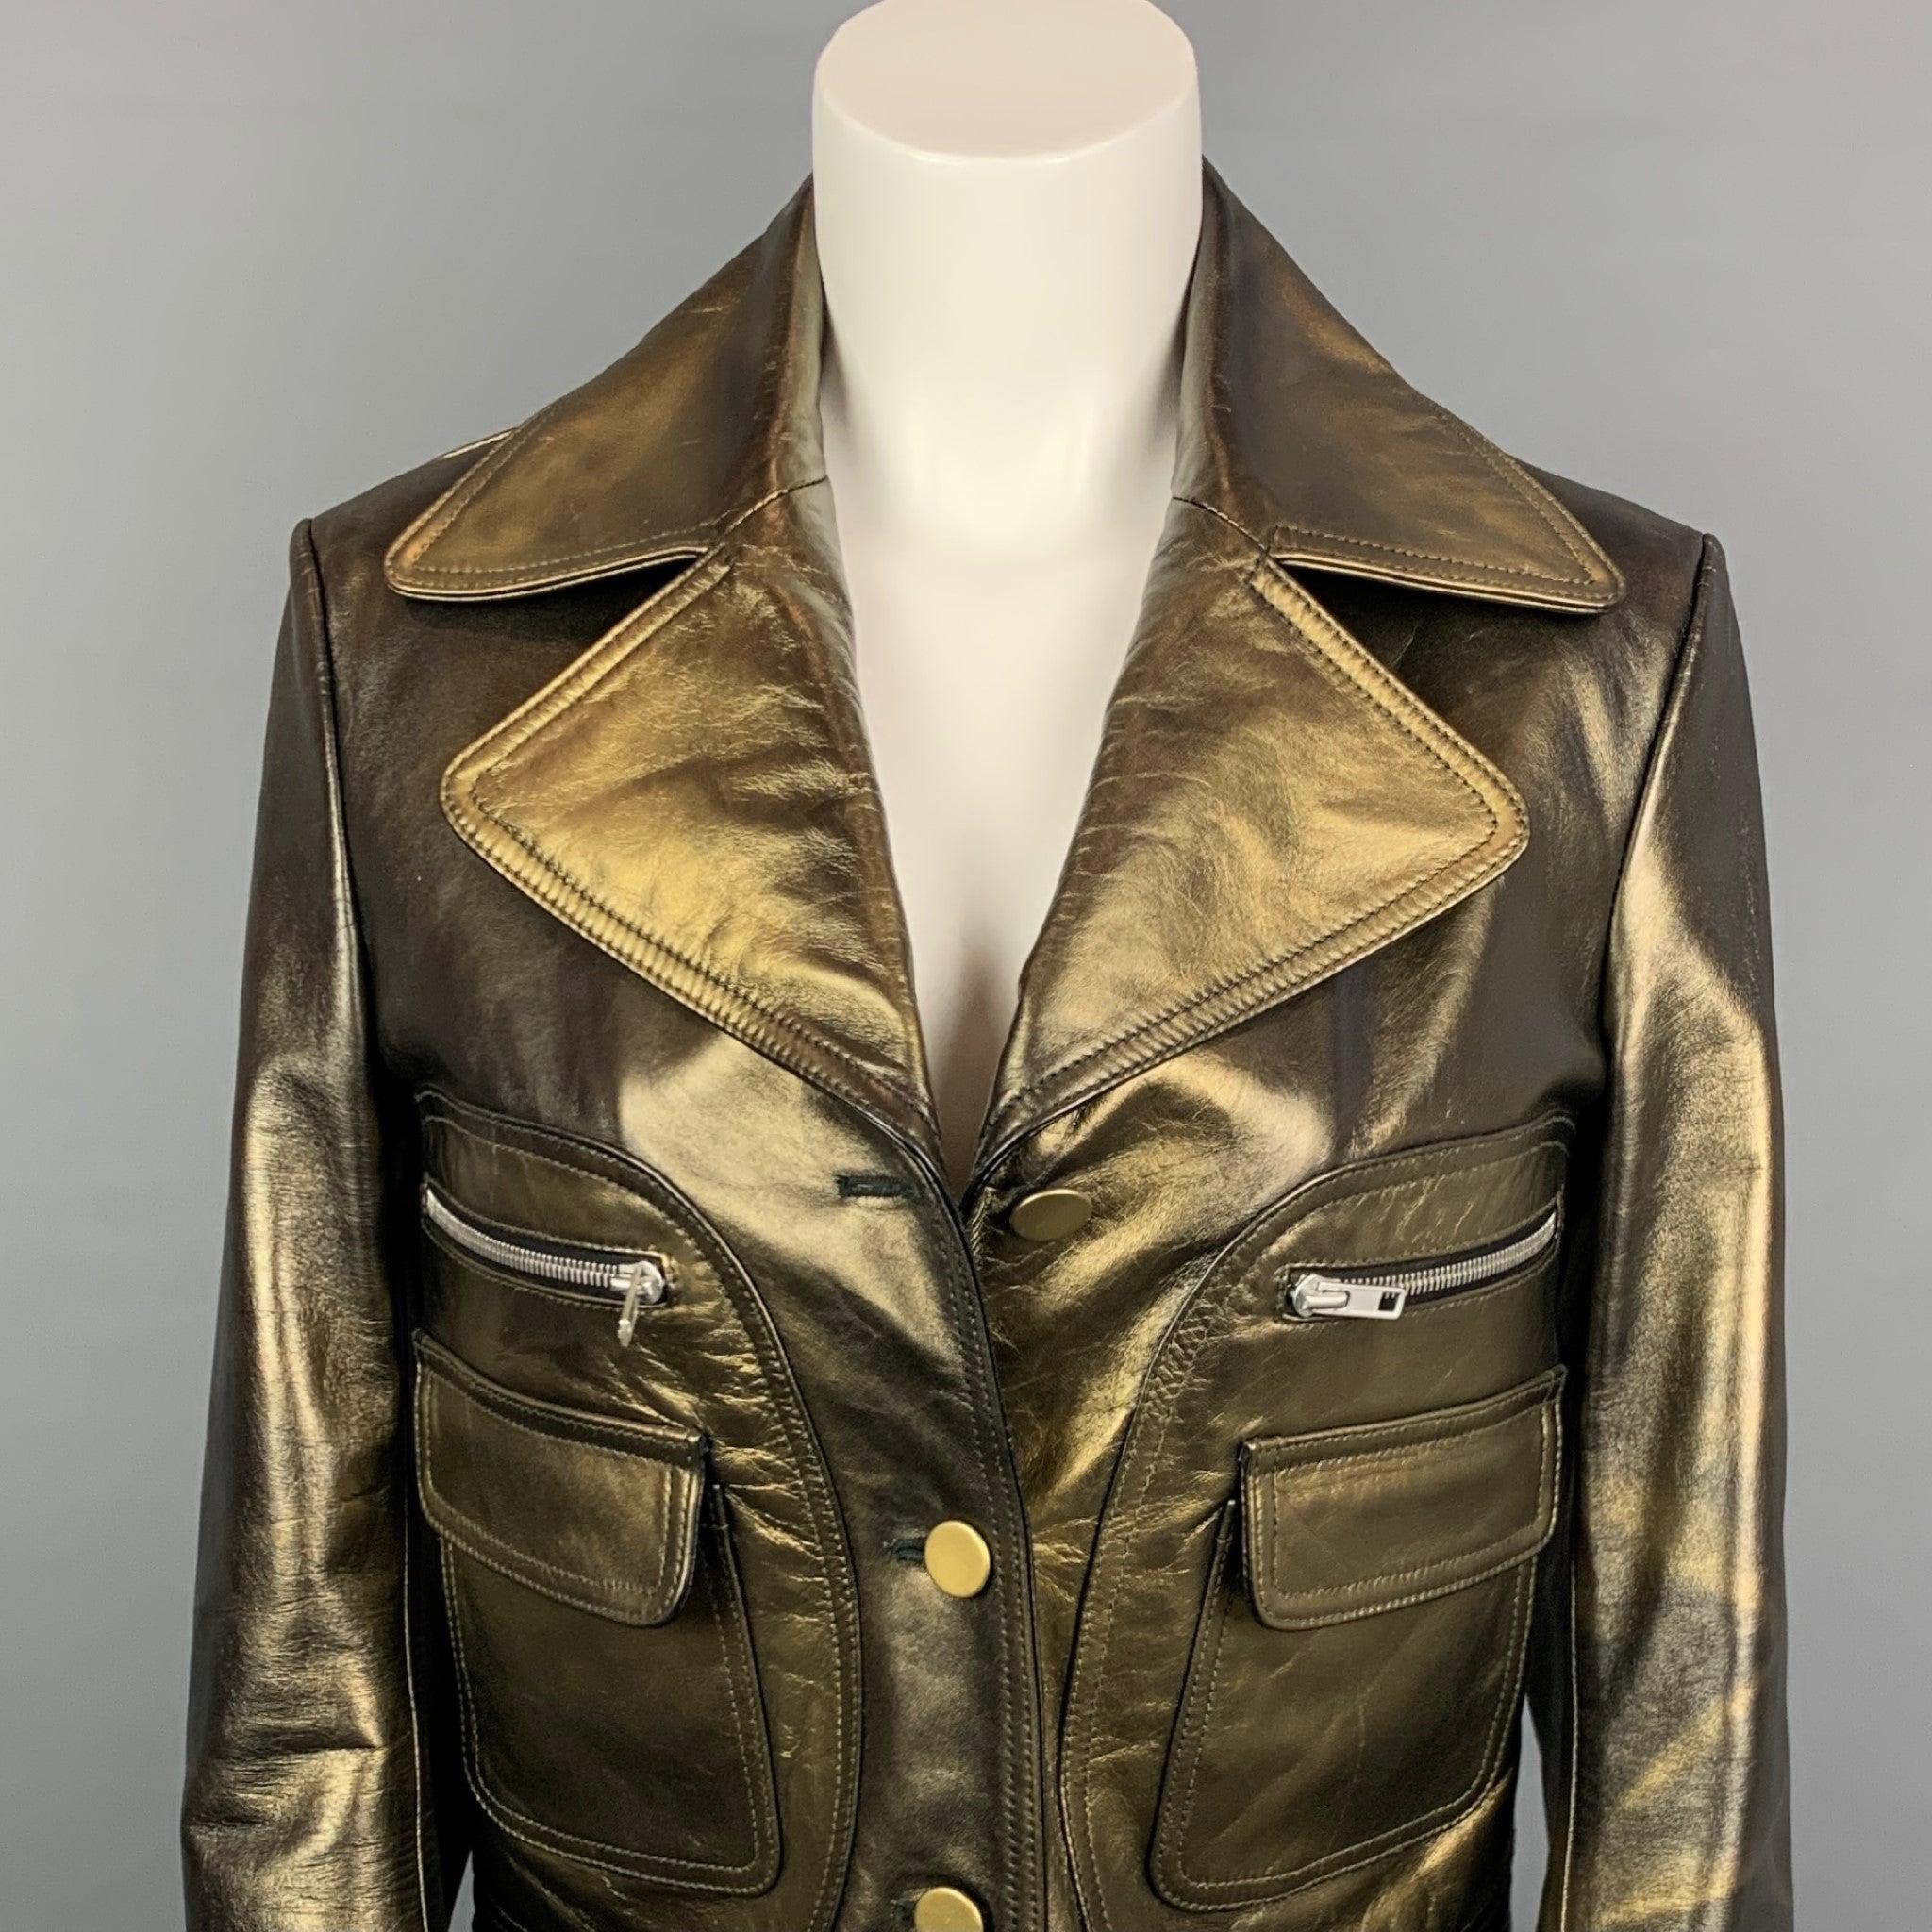 MAISON MARTIN MARGIELA jacket comes in a olive & gold leather with a full liner featuring a notch lapel style, large zipper & flap pockets, and a buttoned closure. Made in Italy.Excellent
Pre-Owned Condition. 

Marked:   40 

Measurements: 
